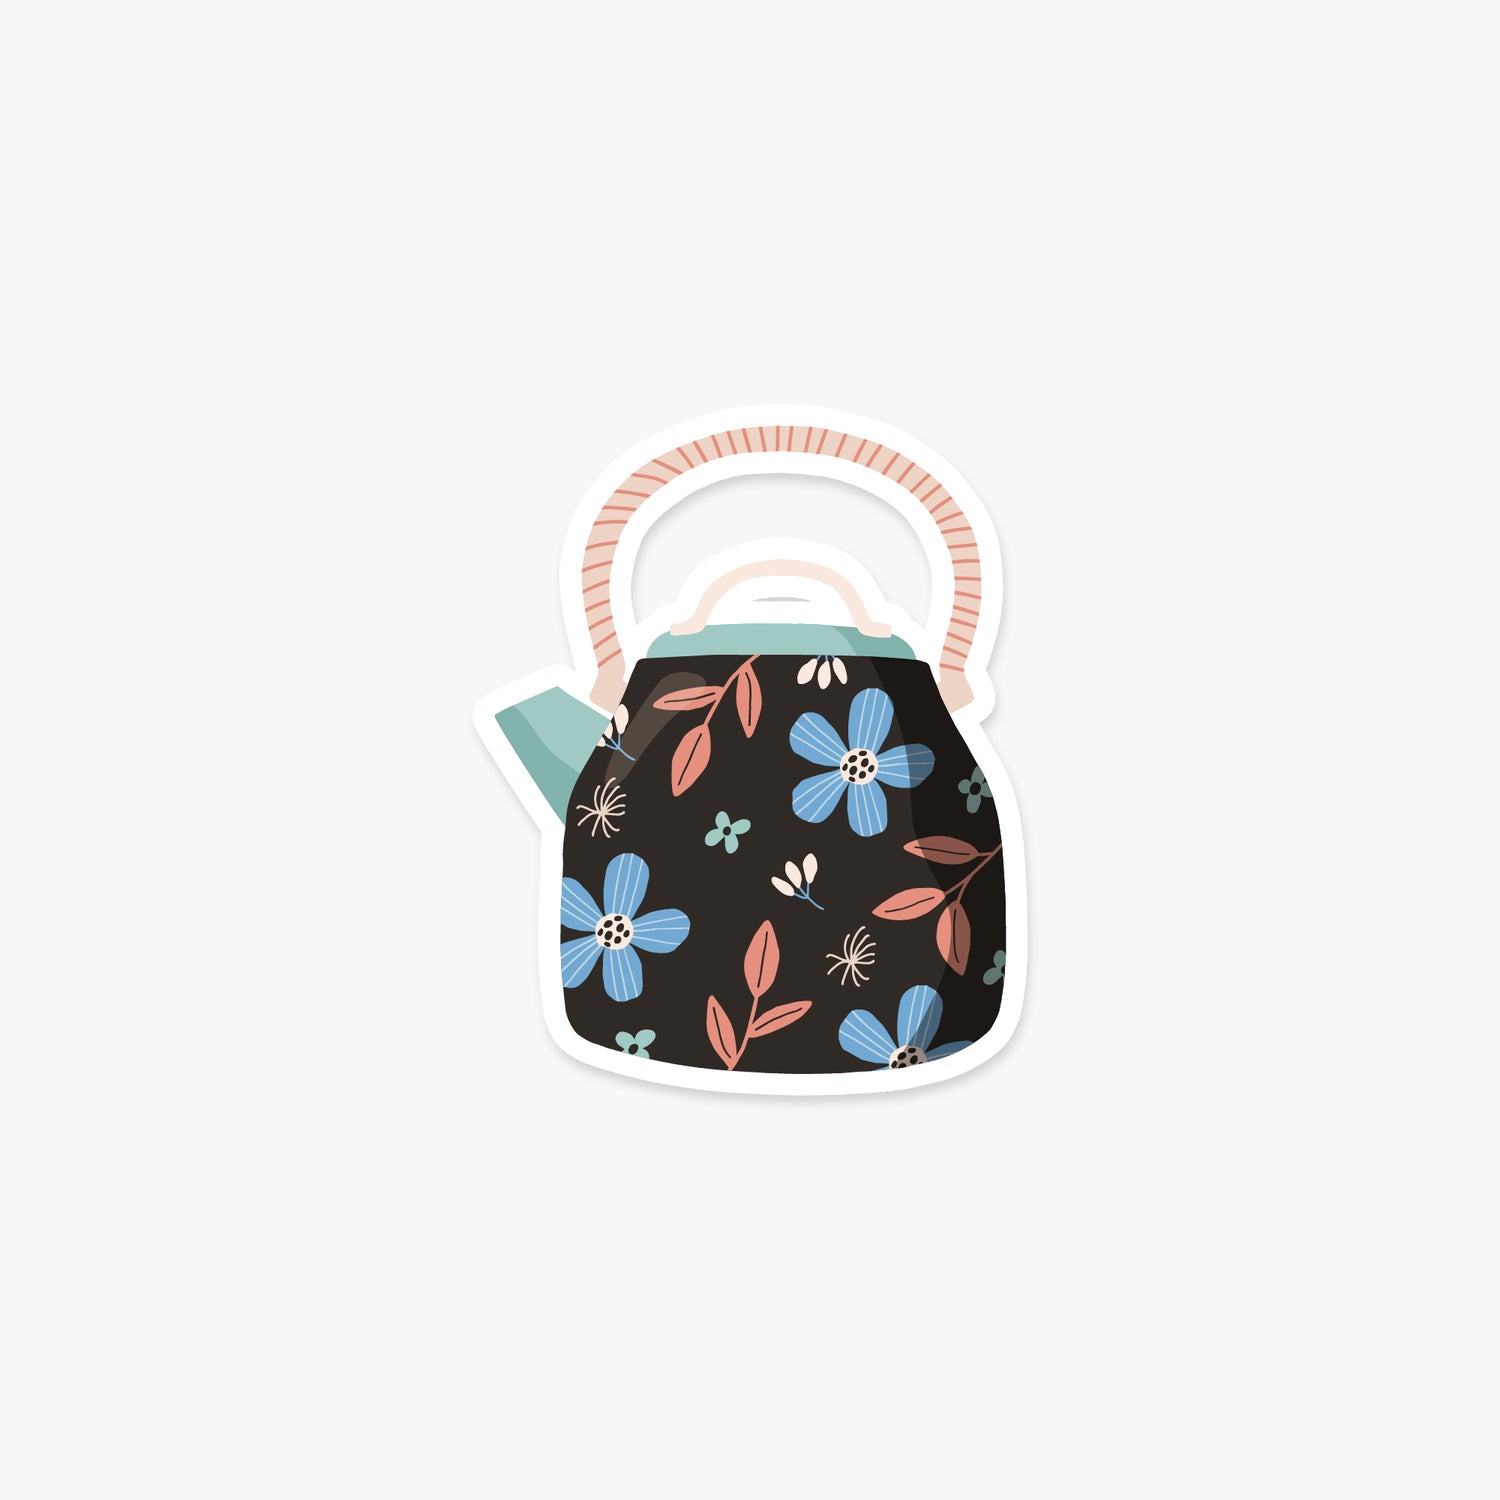 Ceramic teapot with flowers - Fall & Autumn Sticker | Footnotes Paper